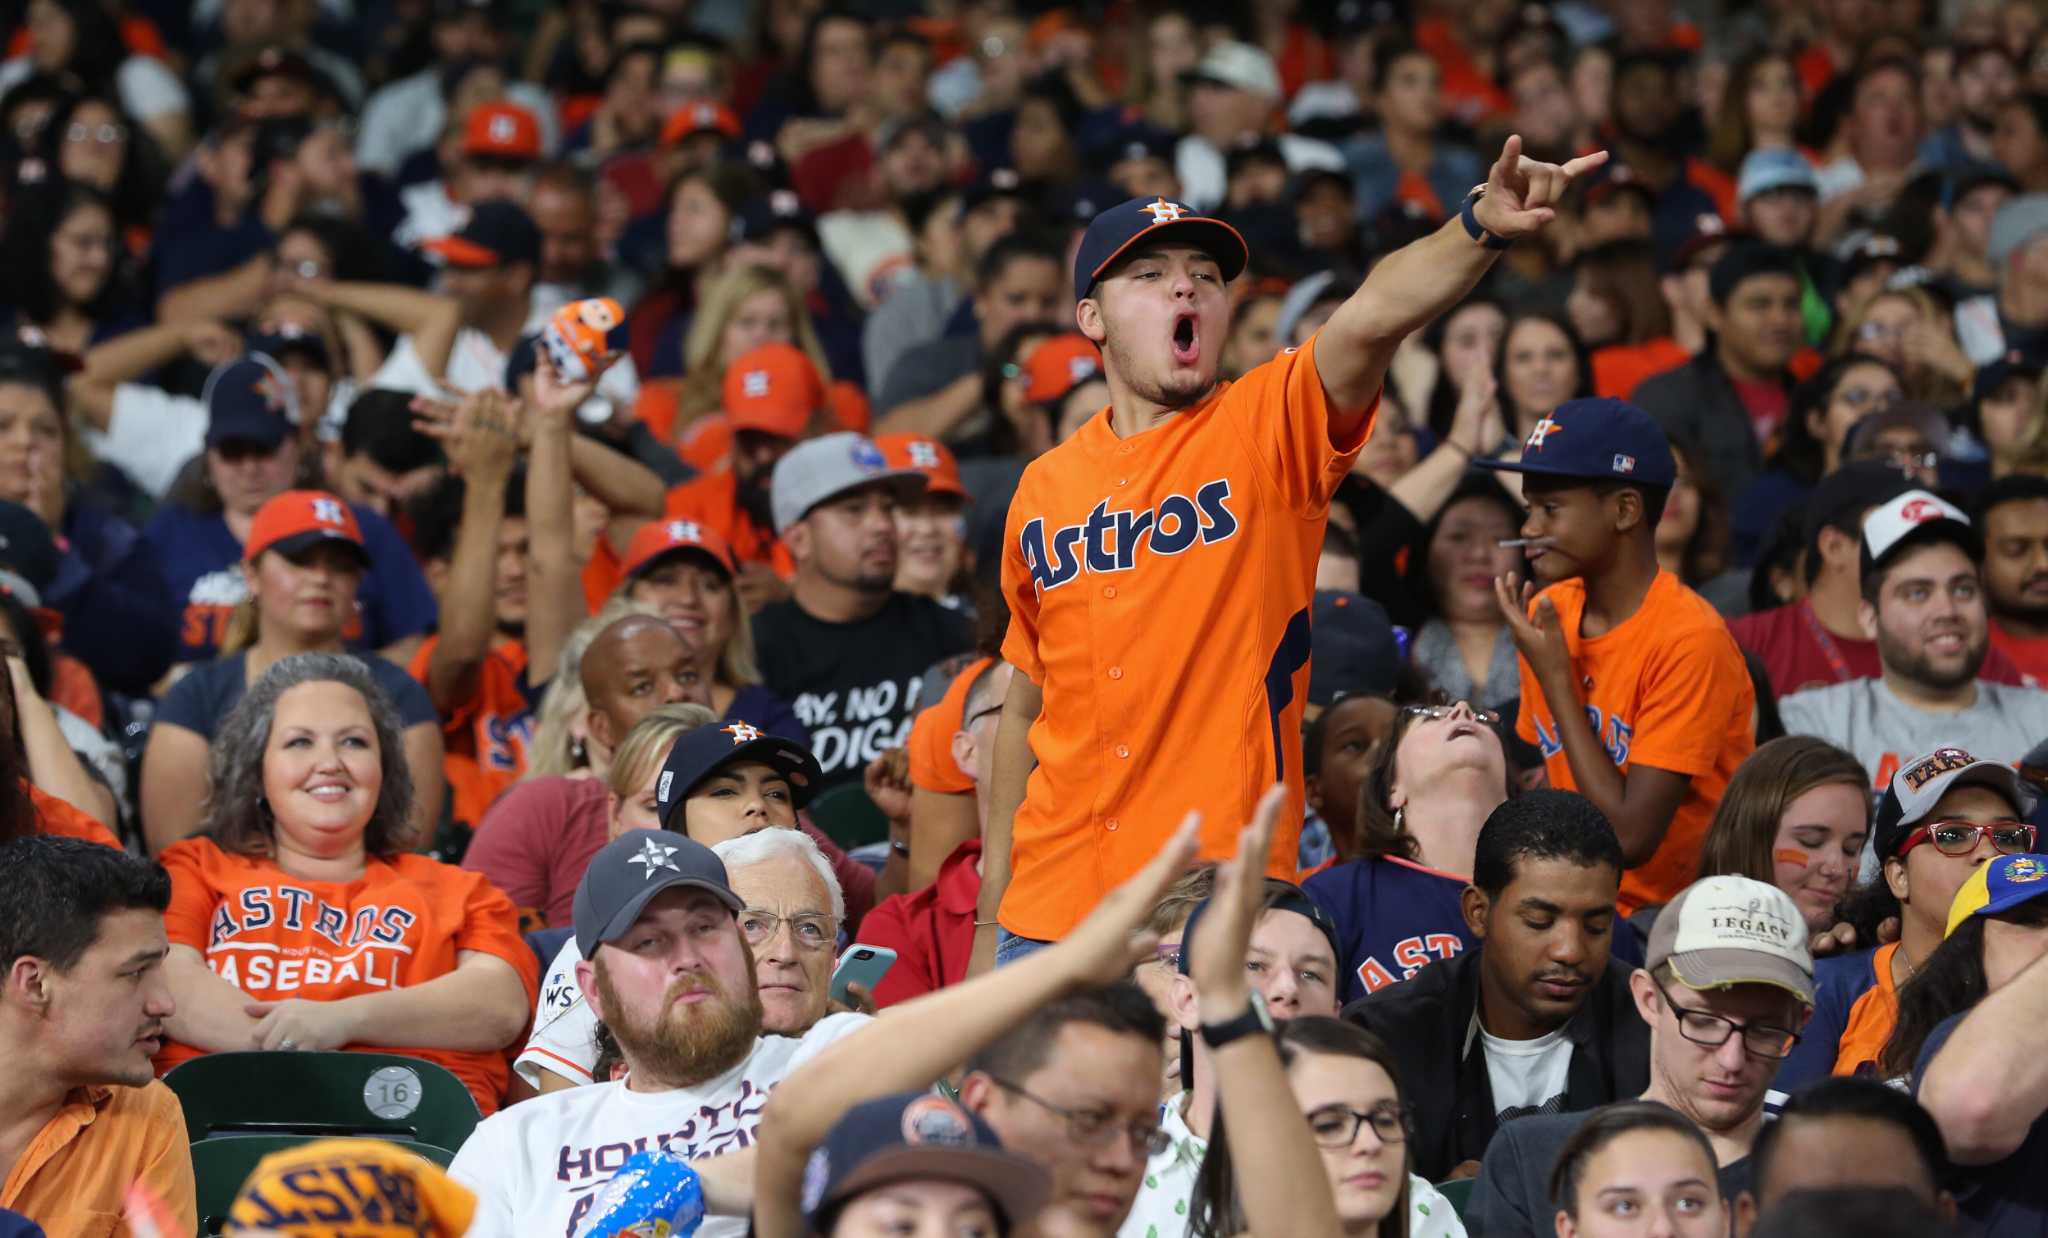 Fans in Conroe line up to collect Astros swag after World Series win